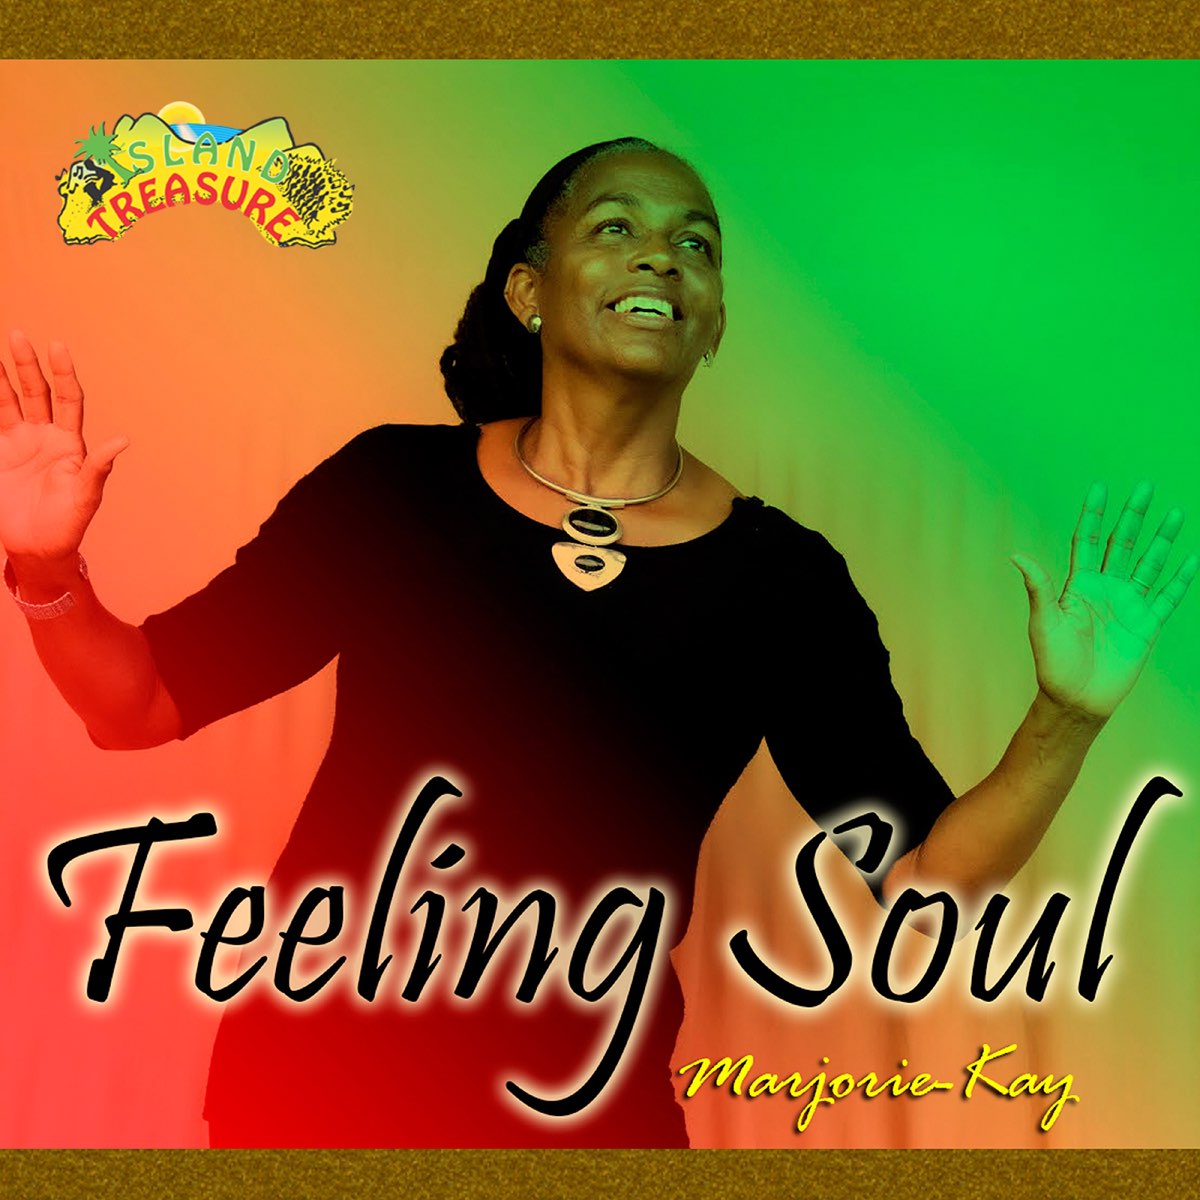 Feel the soul. Hees.